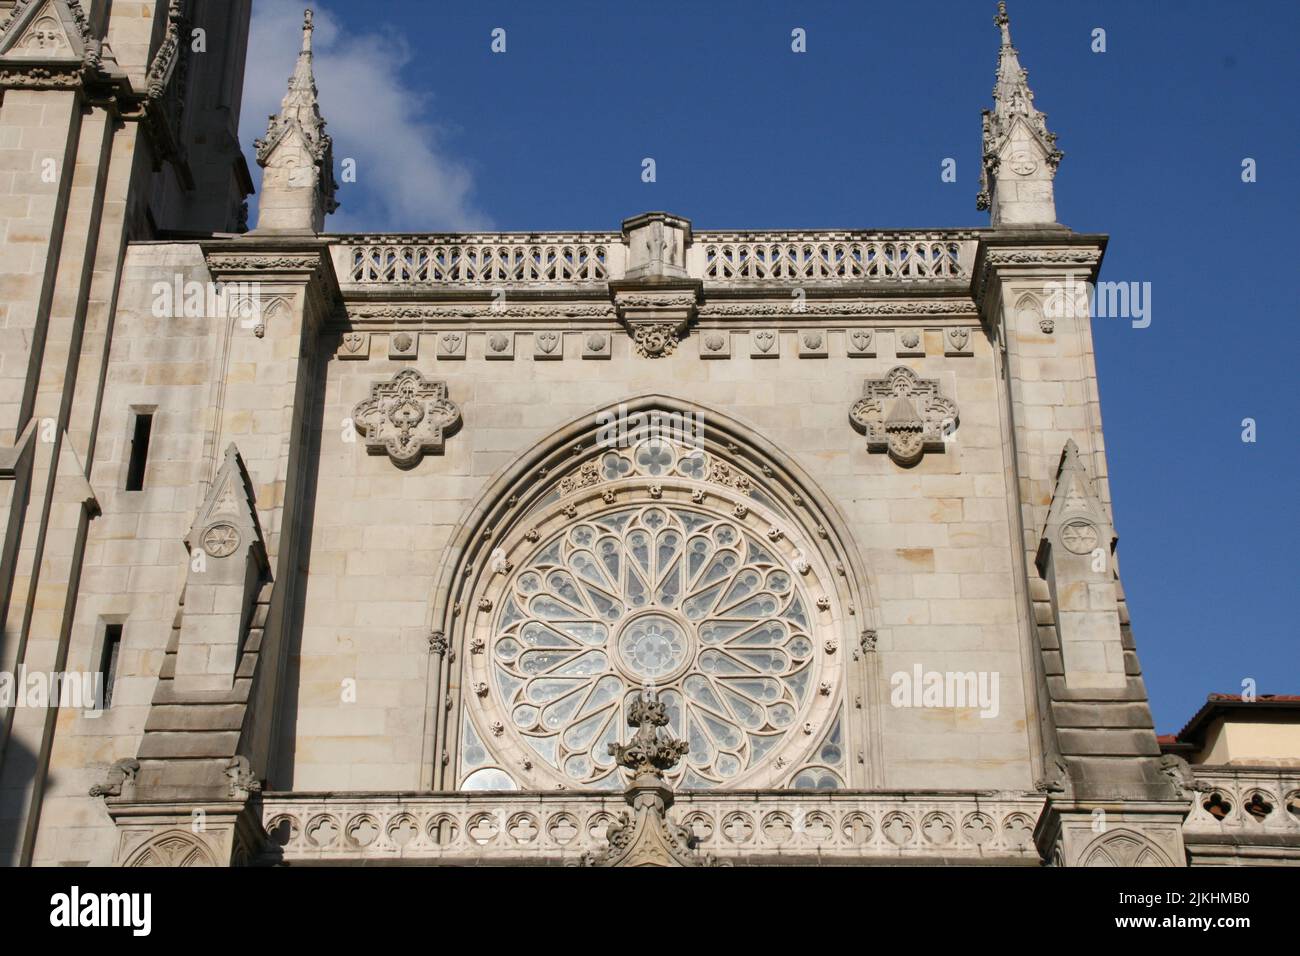 The Santiago (Bilbao) cathedral in Bilbao, Biscay, Spain Stock Photo